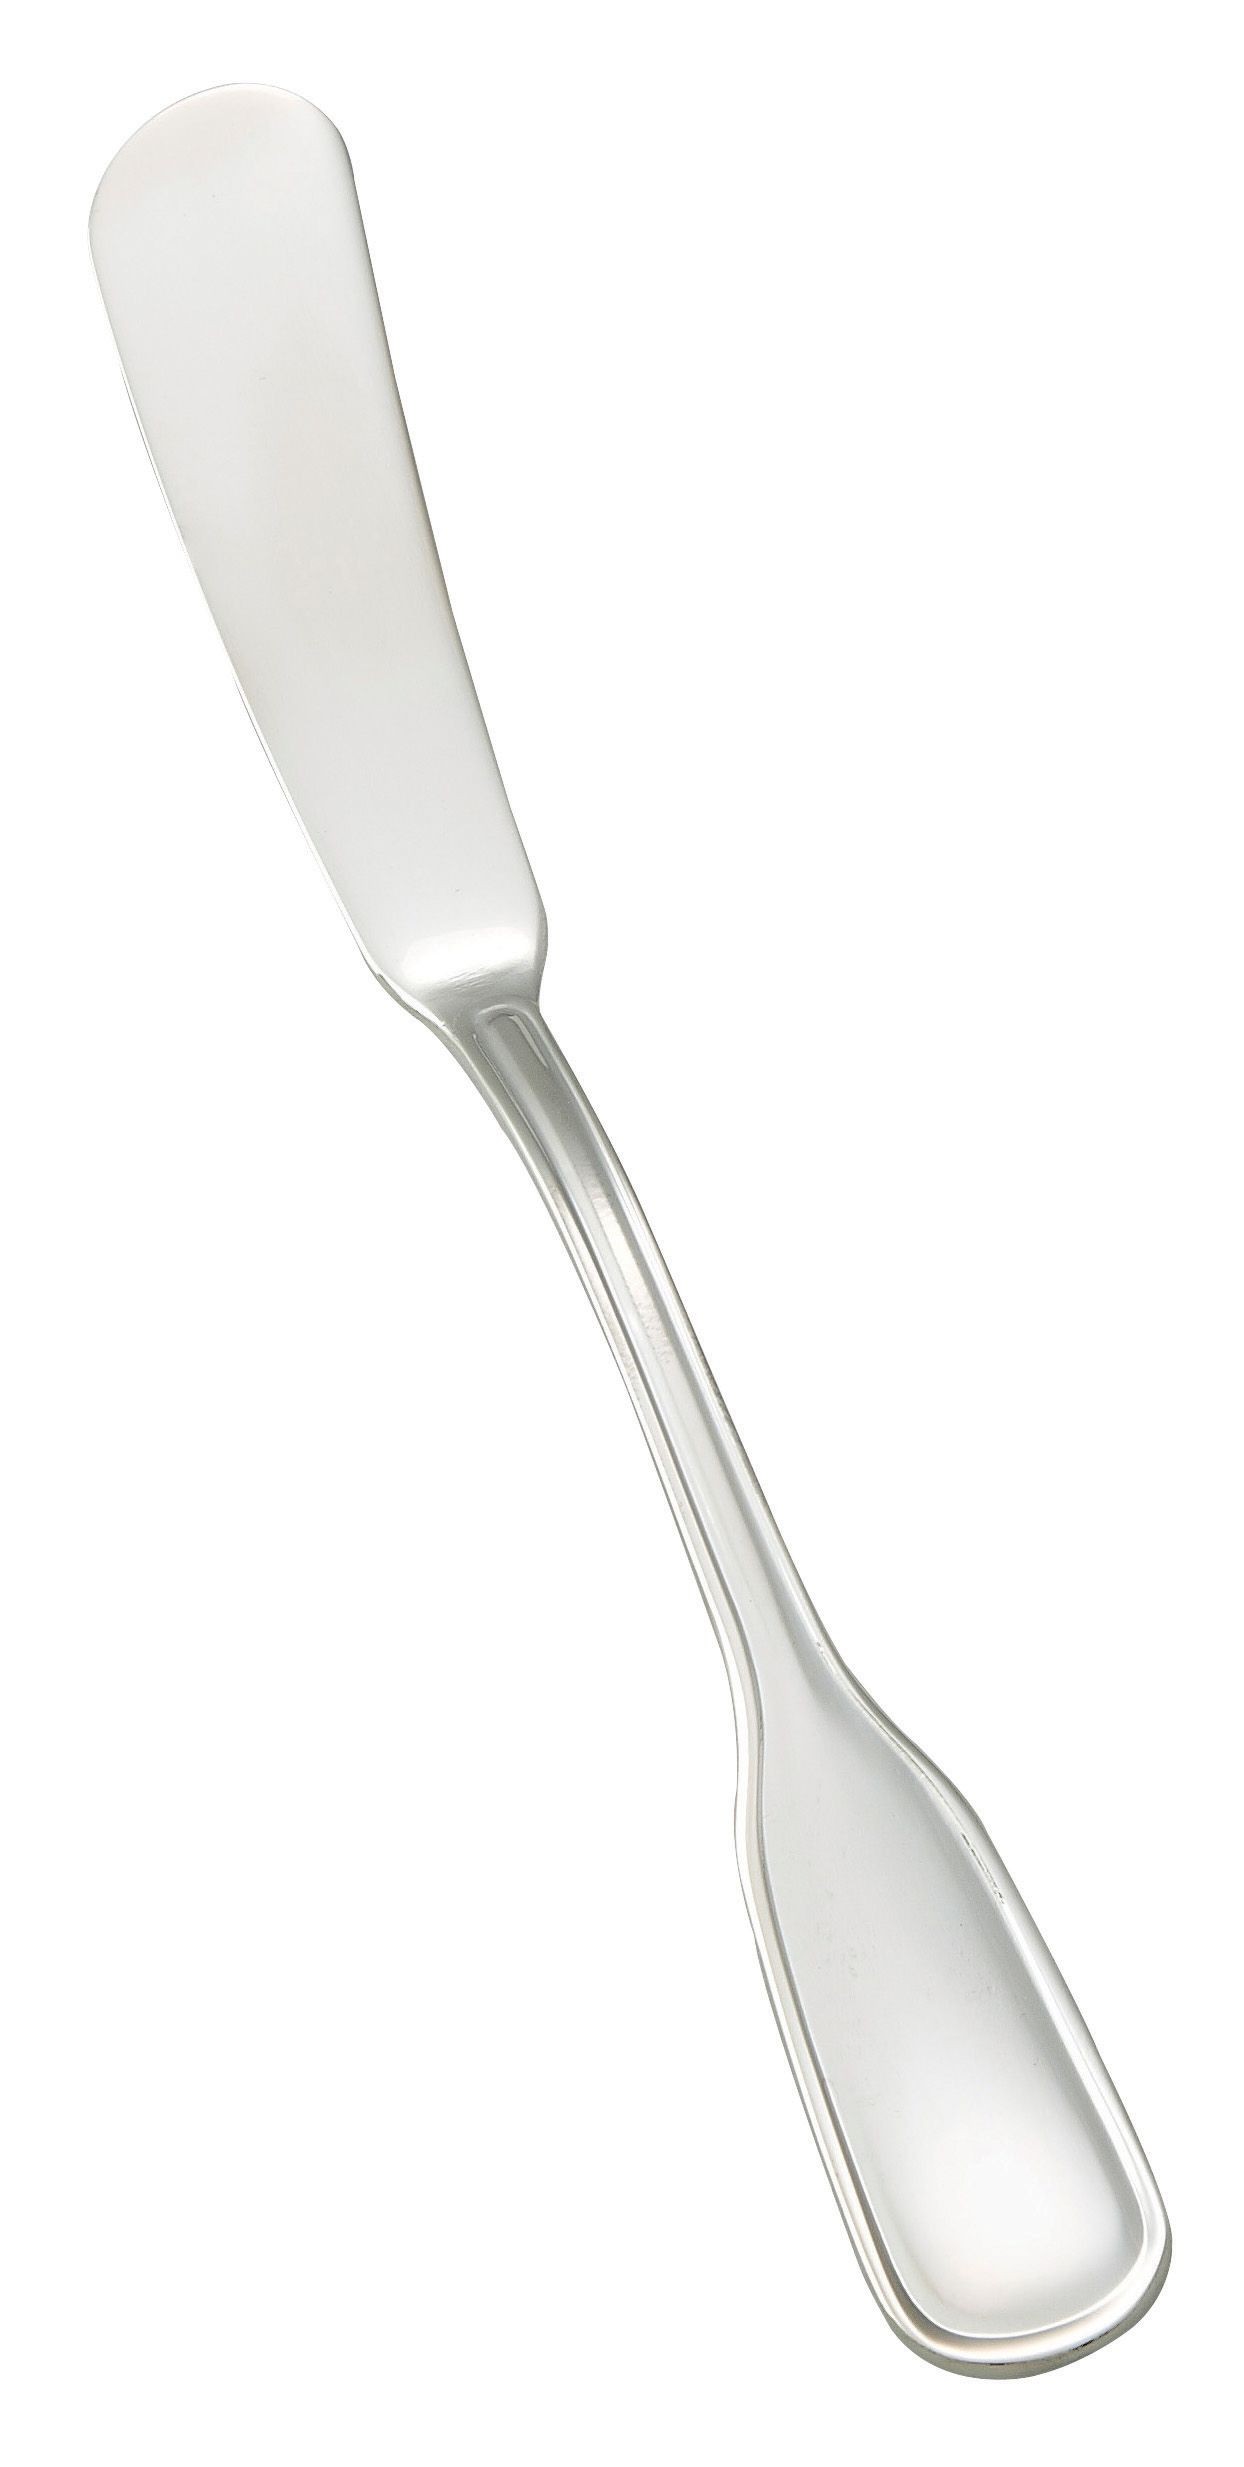 Winco 0033-12 Oxford Extra Heavy Stainless Steel Butter Spreader (12/Pack)